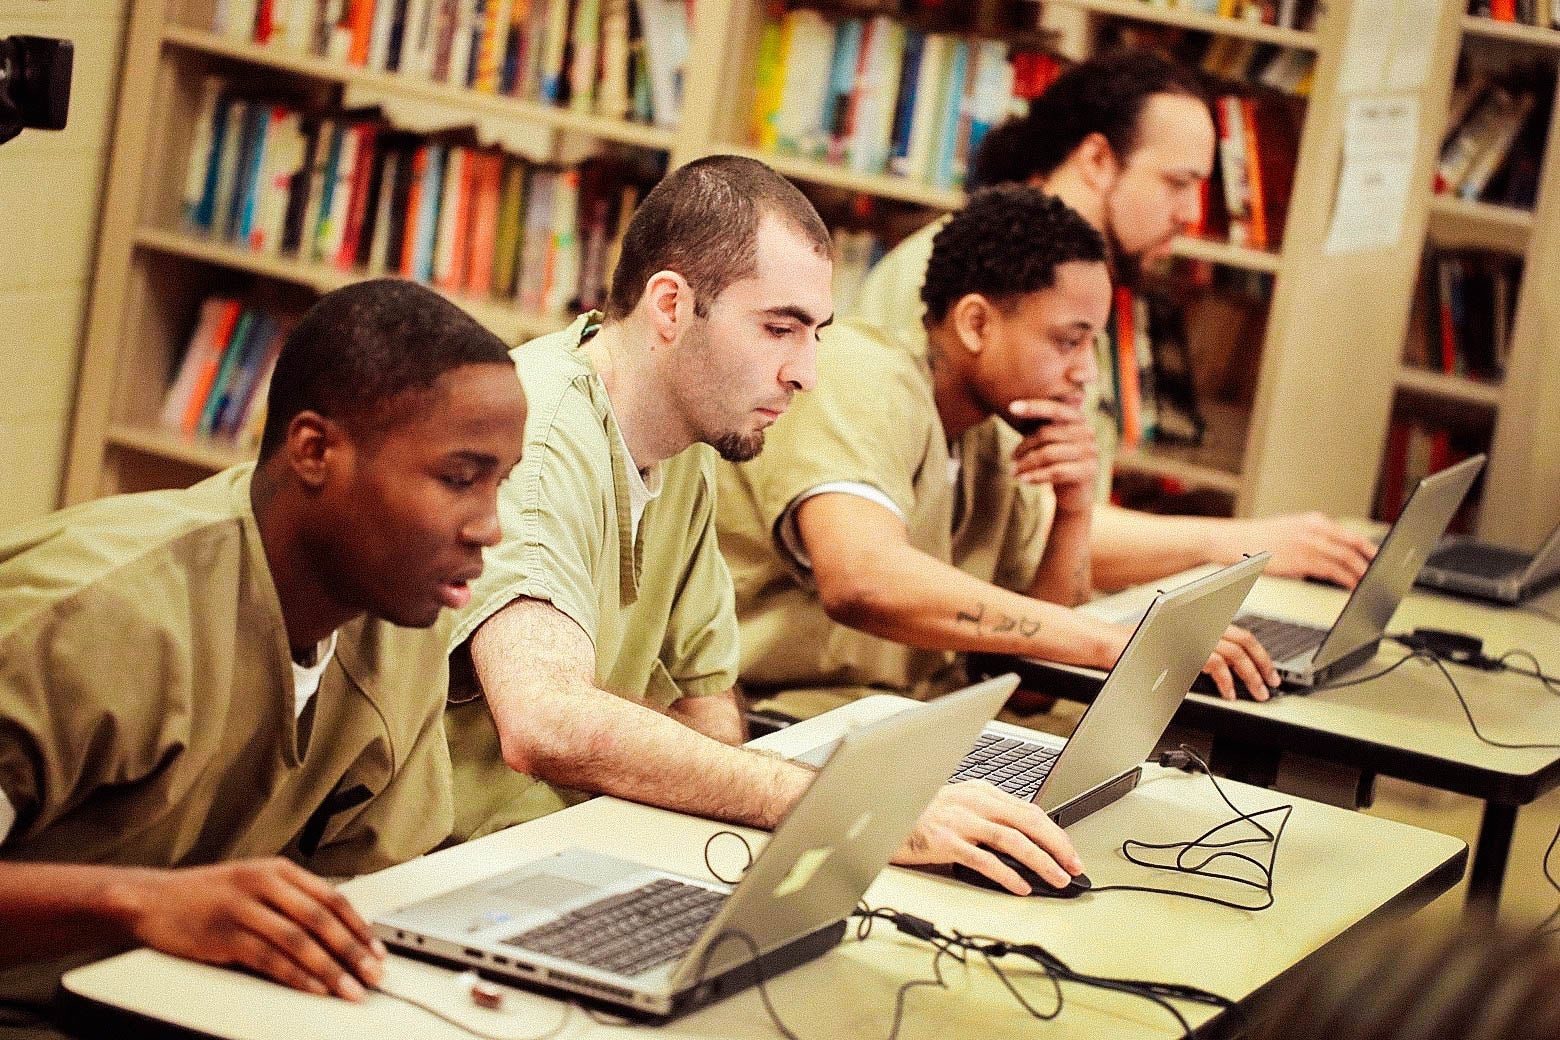 Inmates sit at library desks and work with laptops.